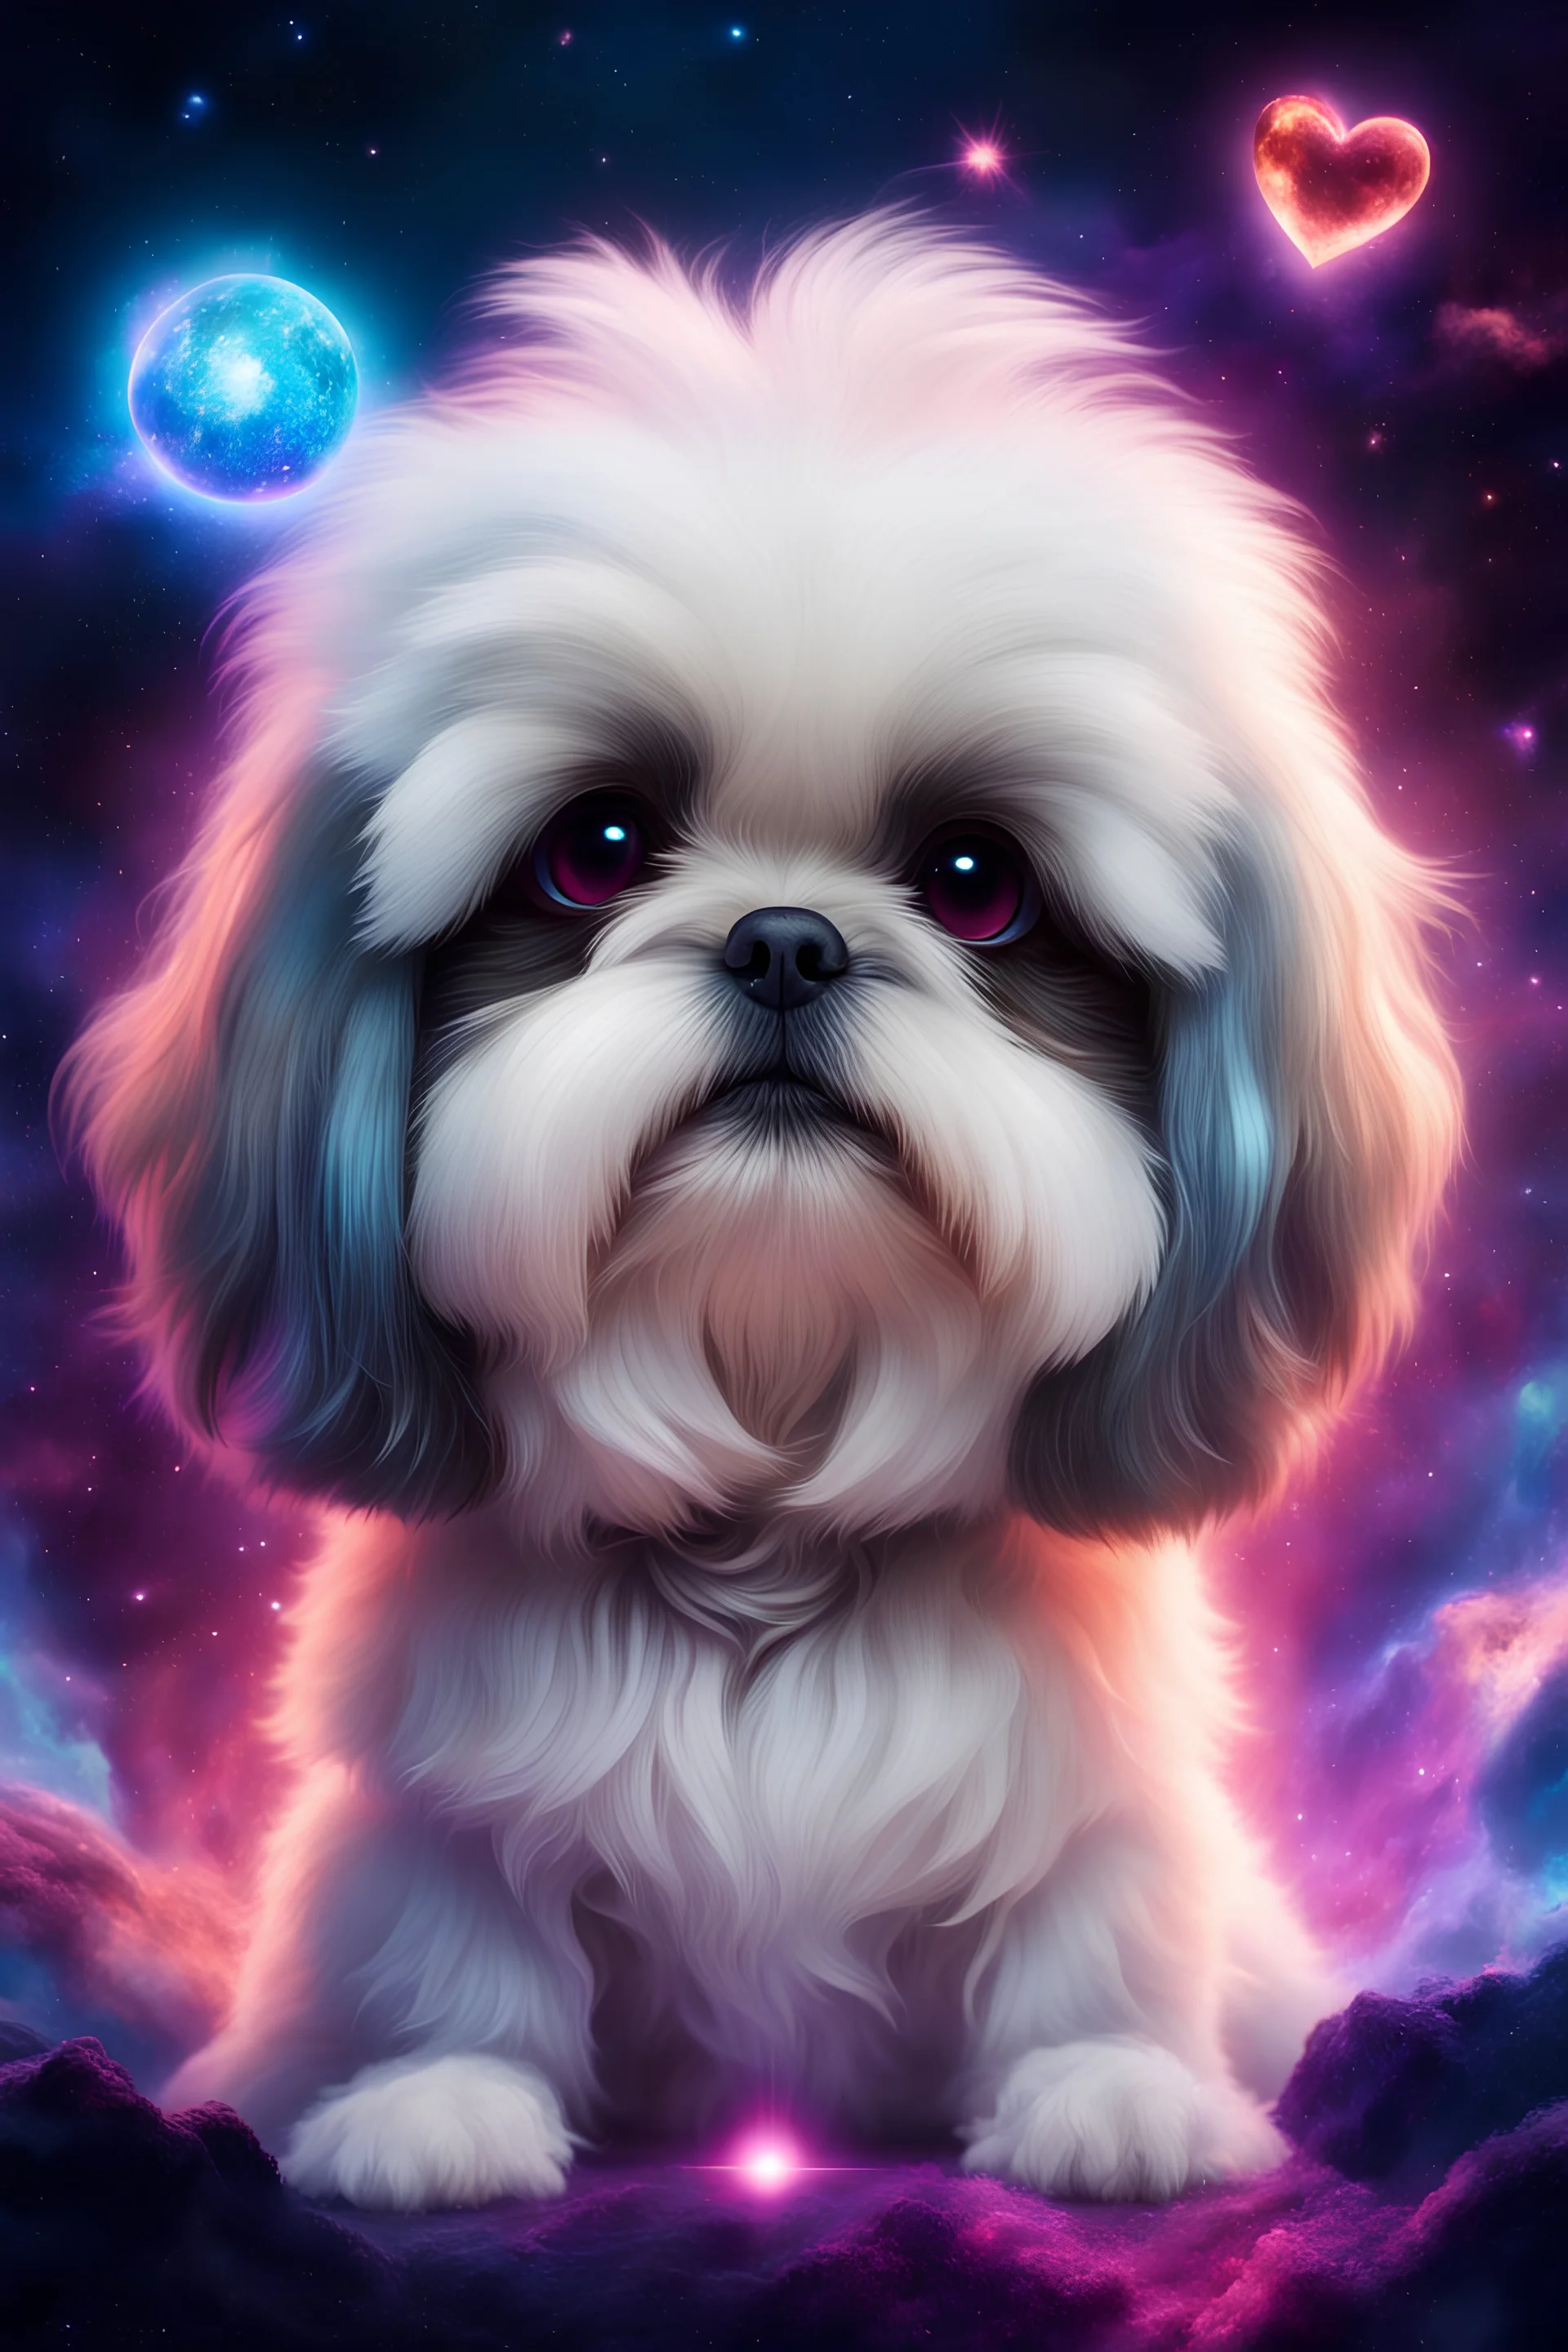 fluffy extra large eyed happy puppy white-gold shih-tzu in sith lord uniform in the distance a colorful intricate HEART shaped planet similar to earth in a brig ażht nebula. sparkles. Cinematic lighting,vast distances, swirl. fairies. magical DARKNESS. SHARP. EXTREME DEPTH. jellyfish, cinematic eye view